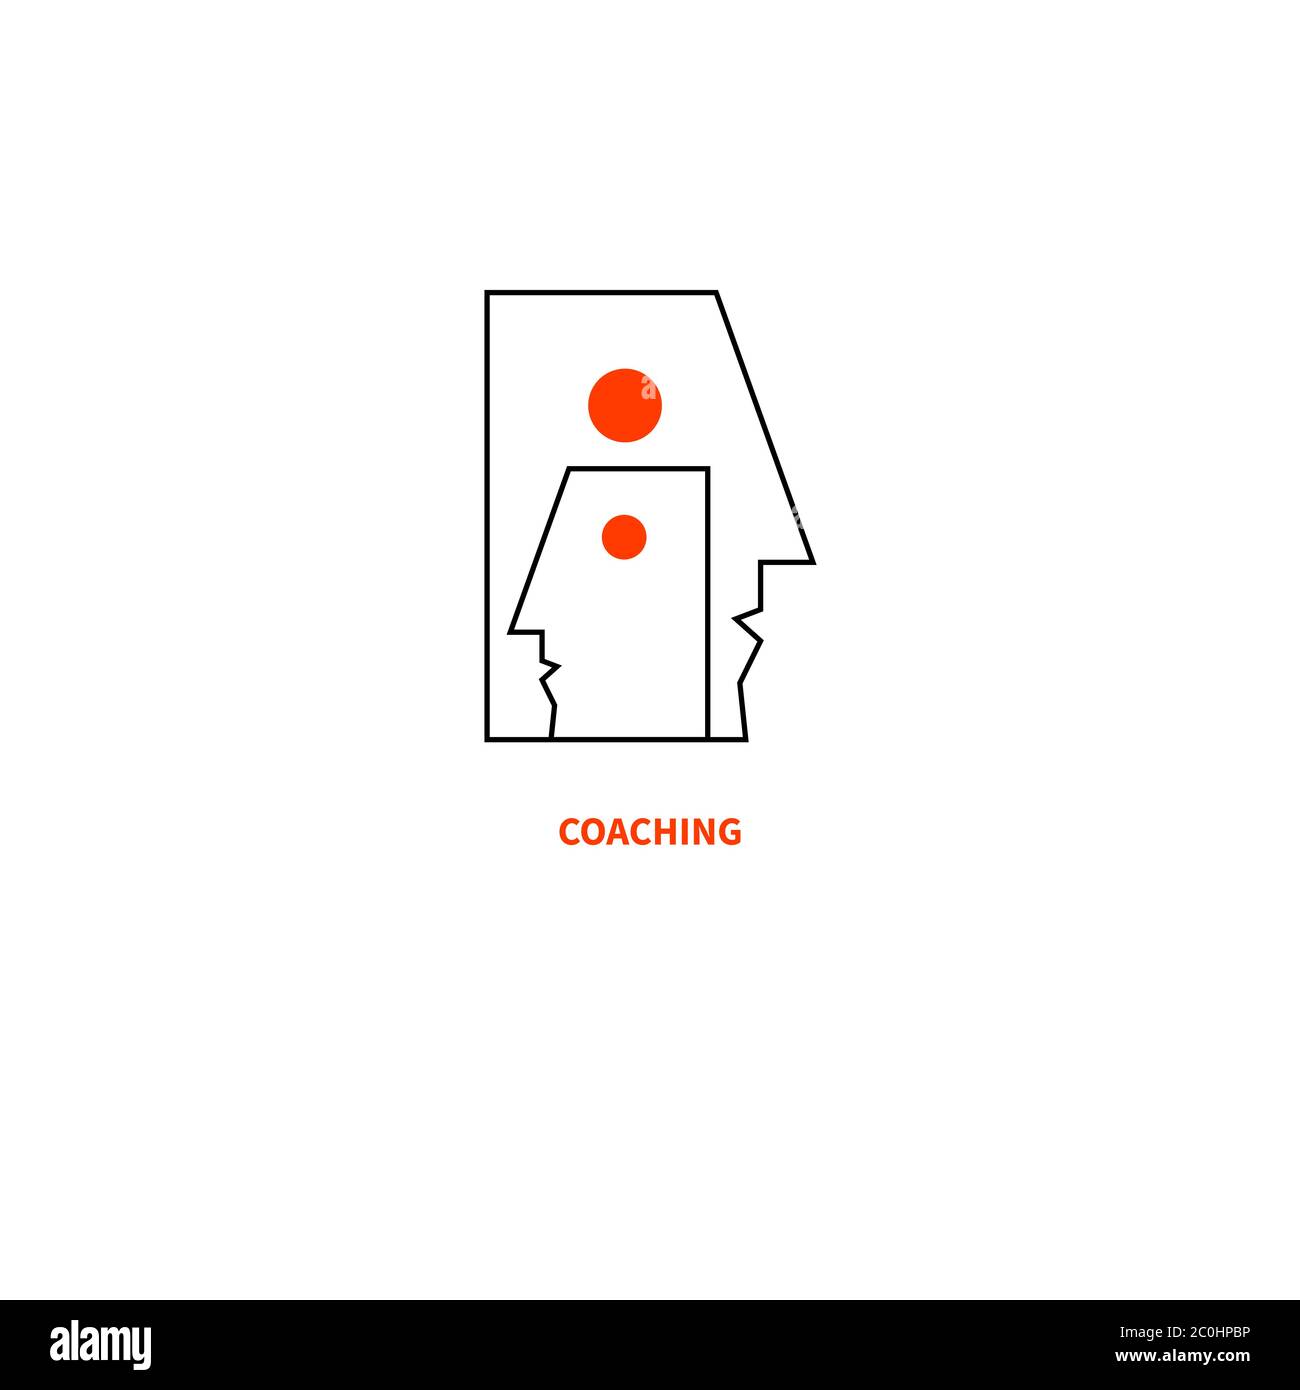 Coach Logo High Resolution Stock Photography and Images - Alamy